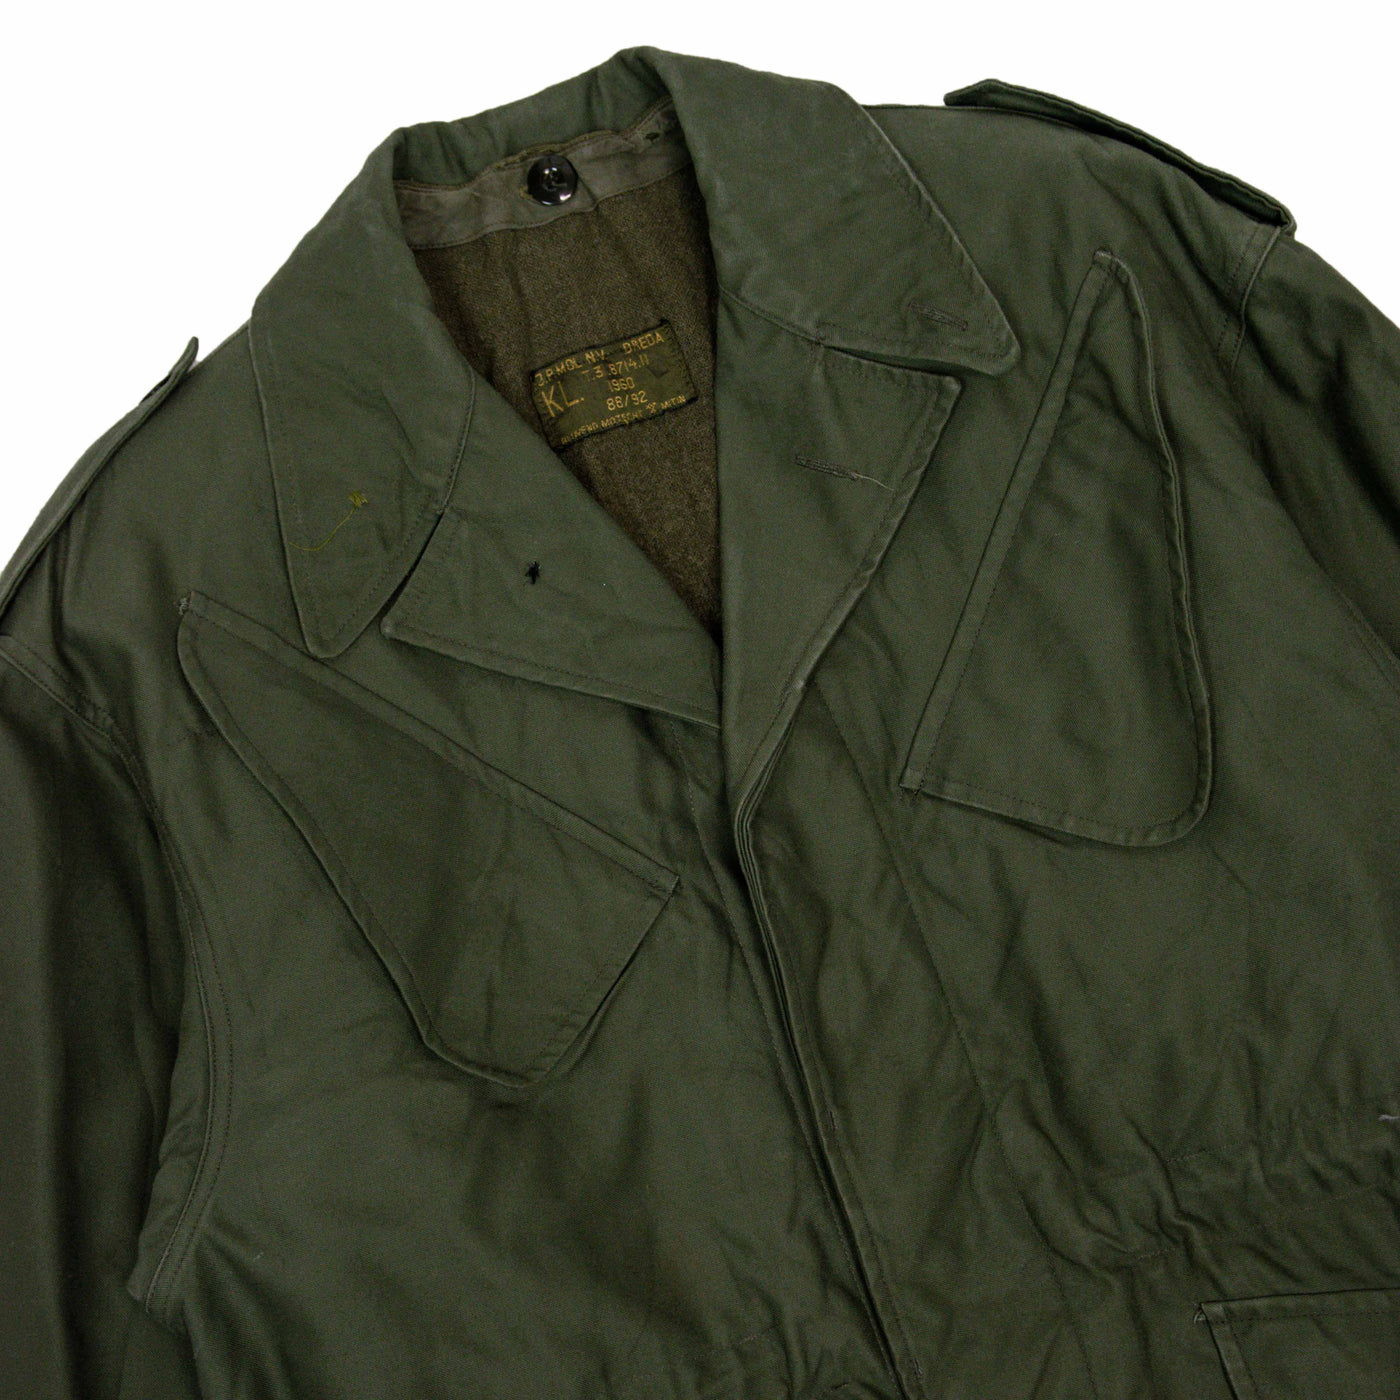 Vintage 80s Seyntex Green Dutch Army Cotton Military Field Jacket Small FRONT DETAIL